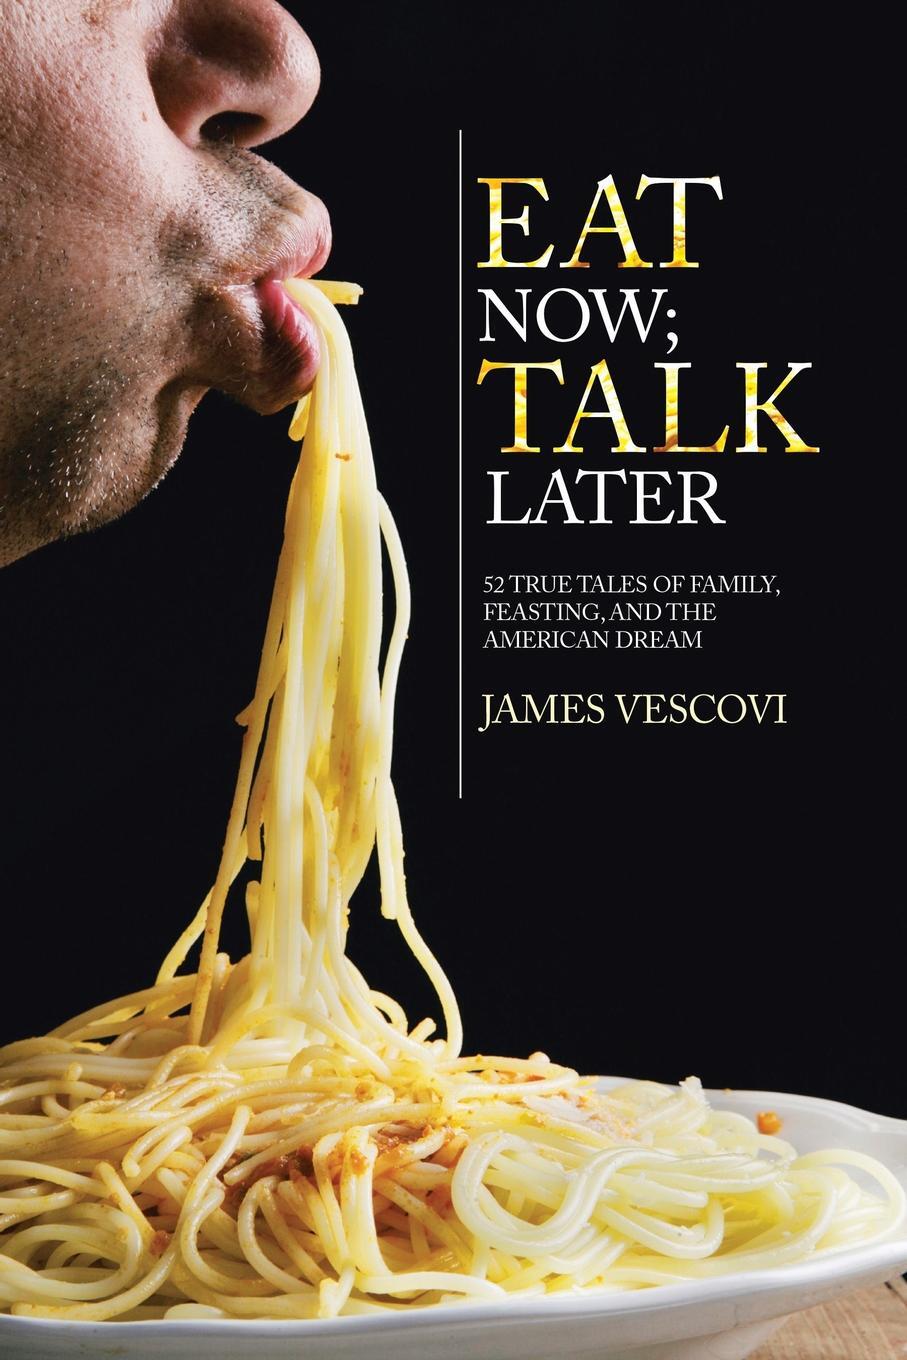 Eat Now. Eat book. Late Talker. Eat them обзор. Now eat this